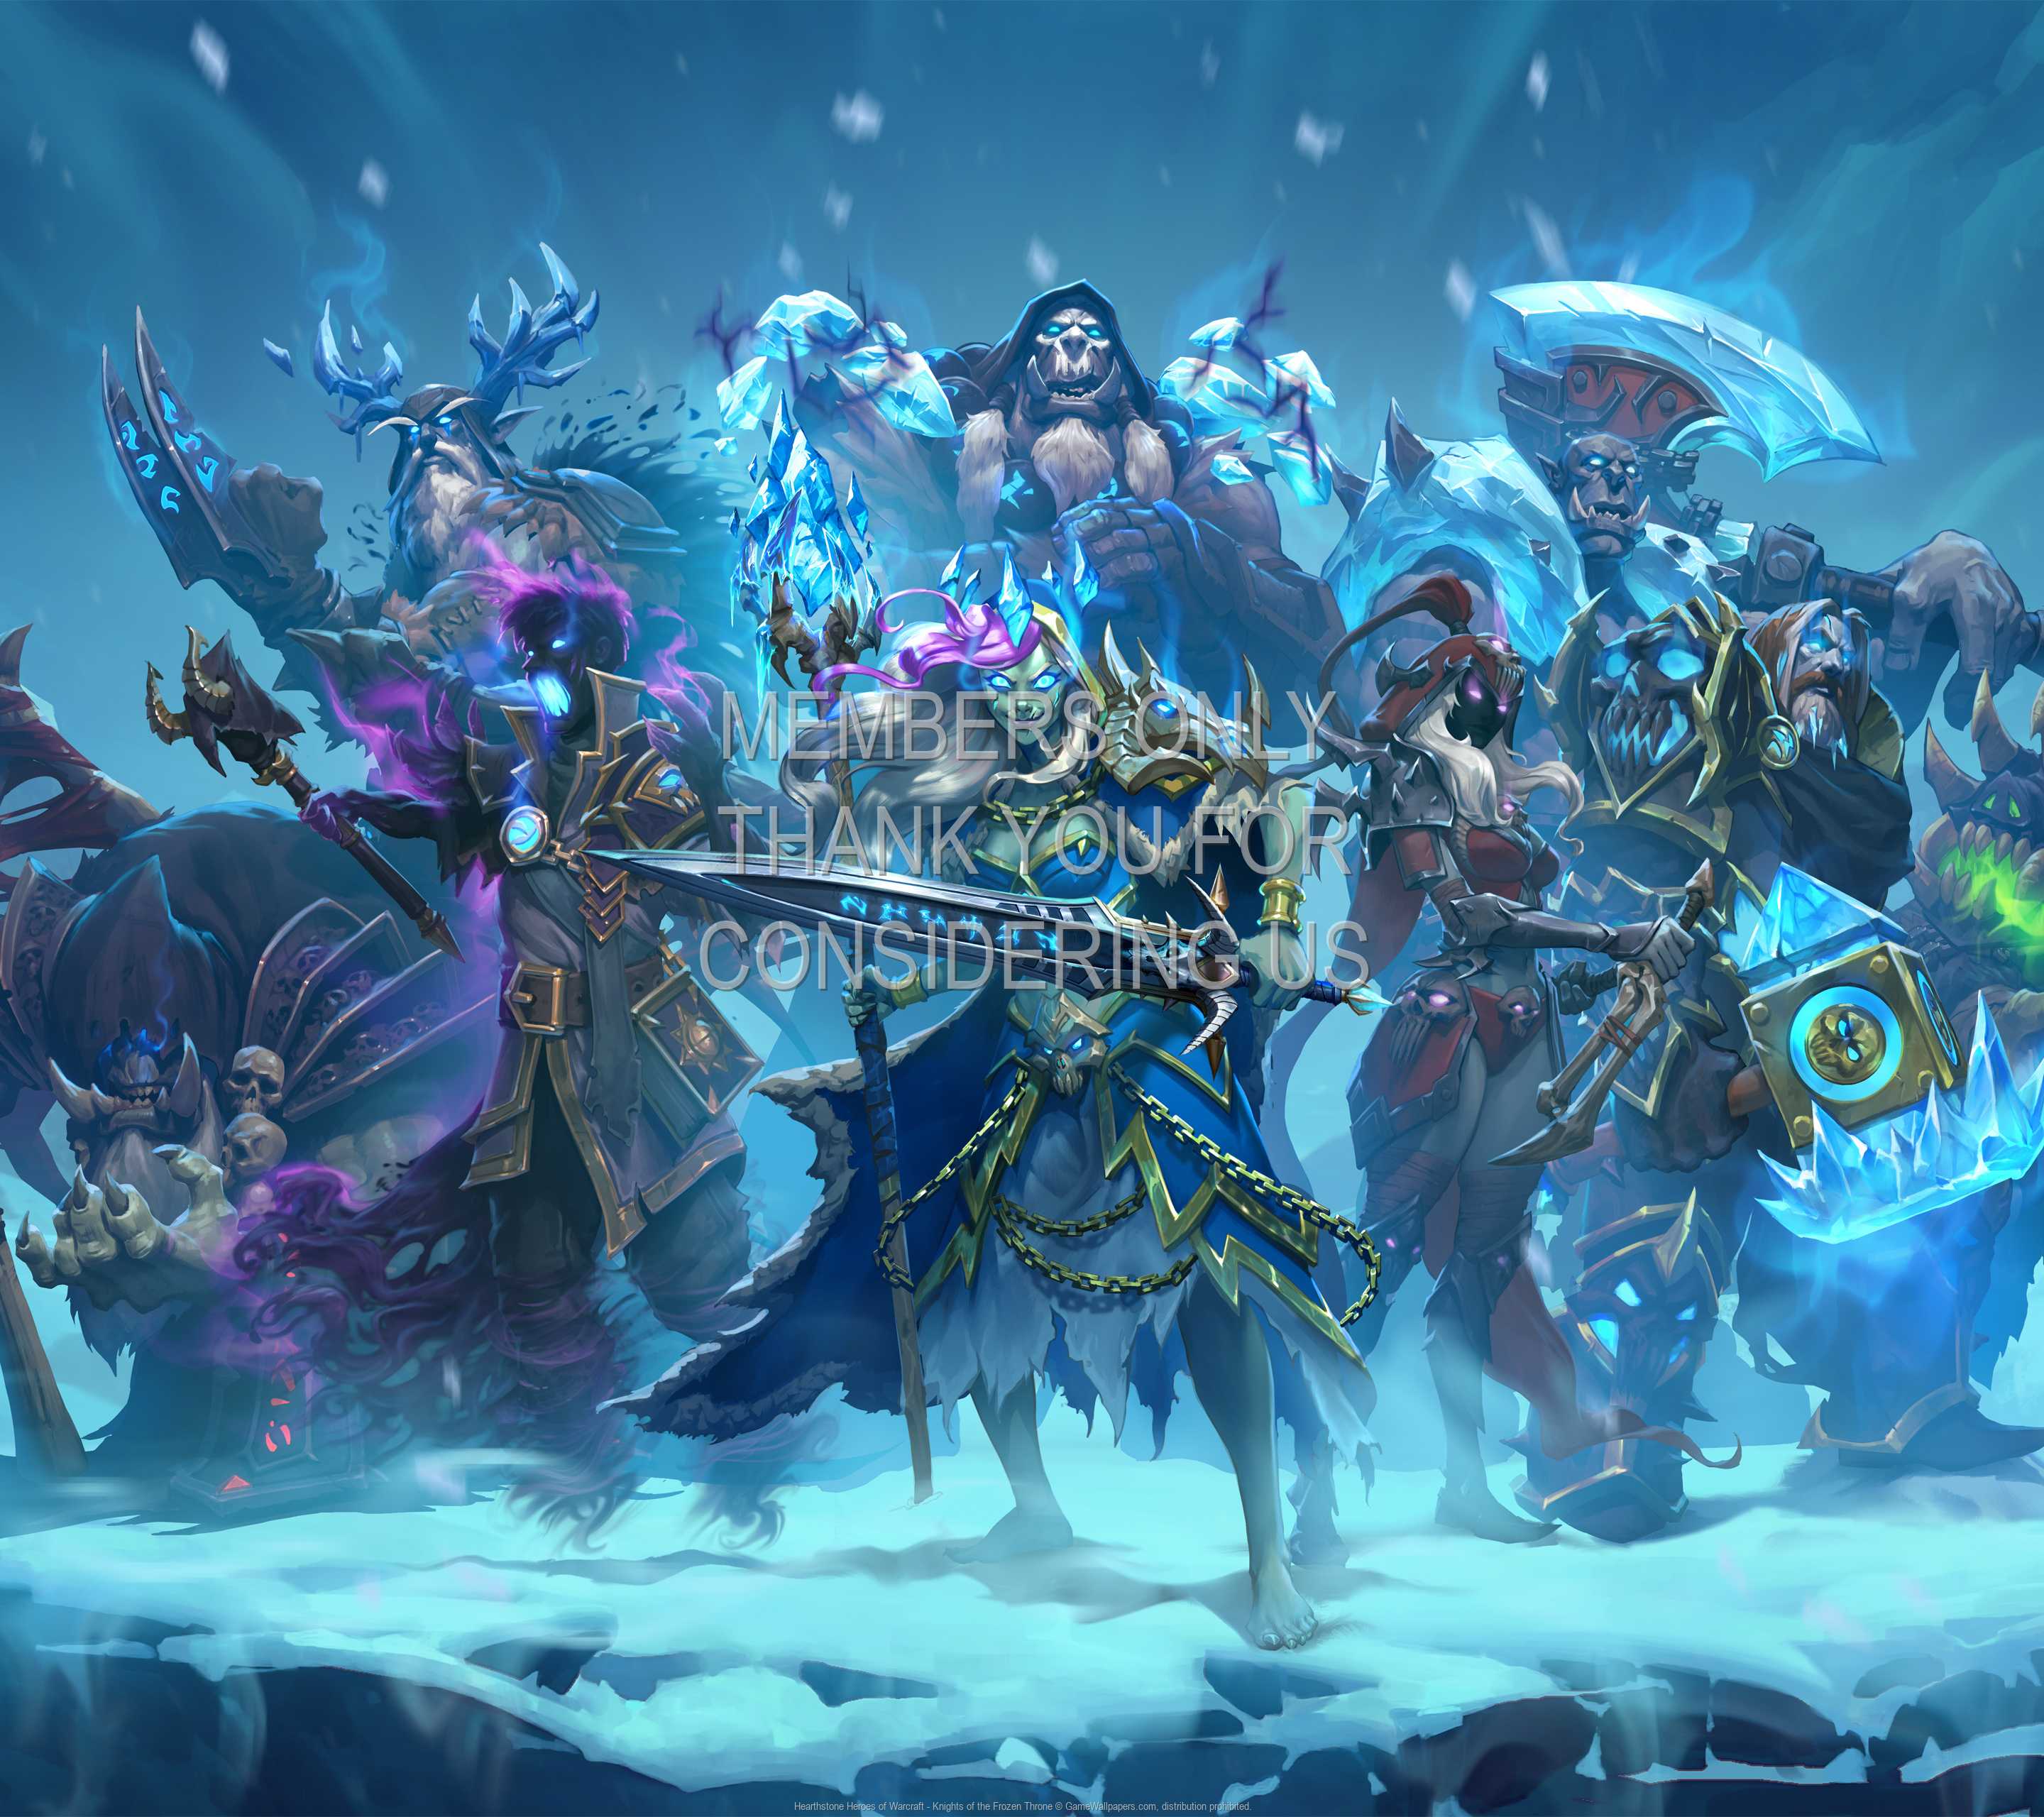 Hearthstone: Heroes of Warcraft - Knights of the Frozen Throne 1440p Horizontal Mobile fond d'cran 02